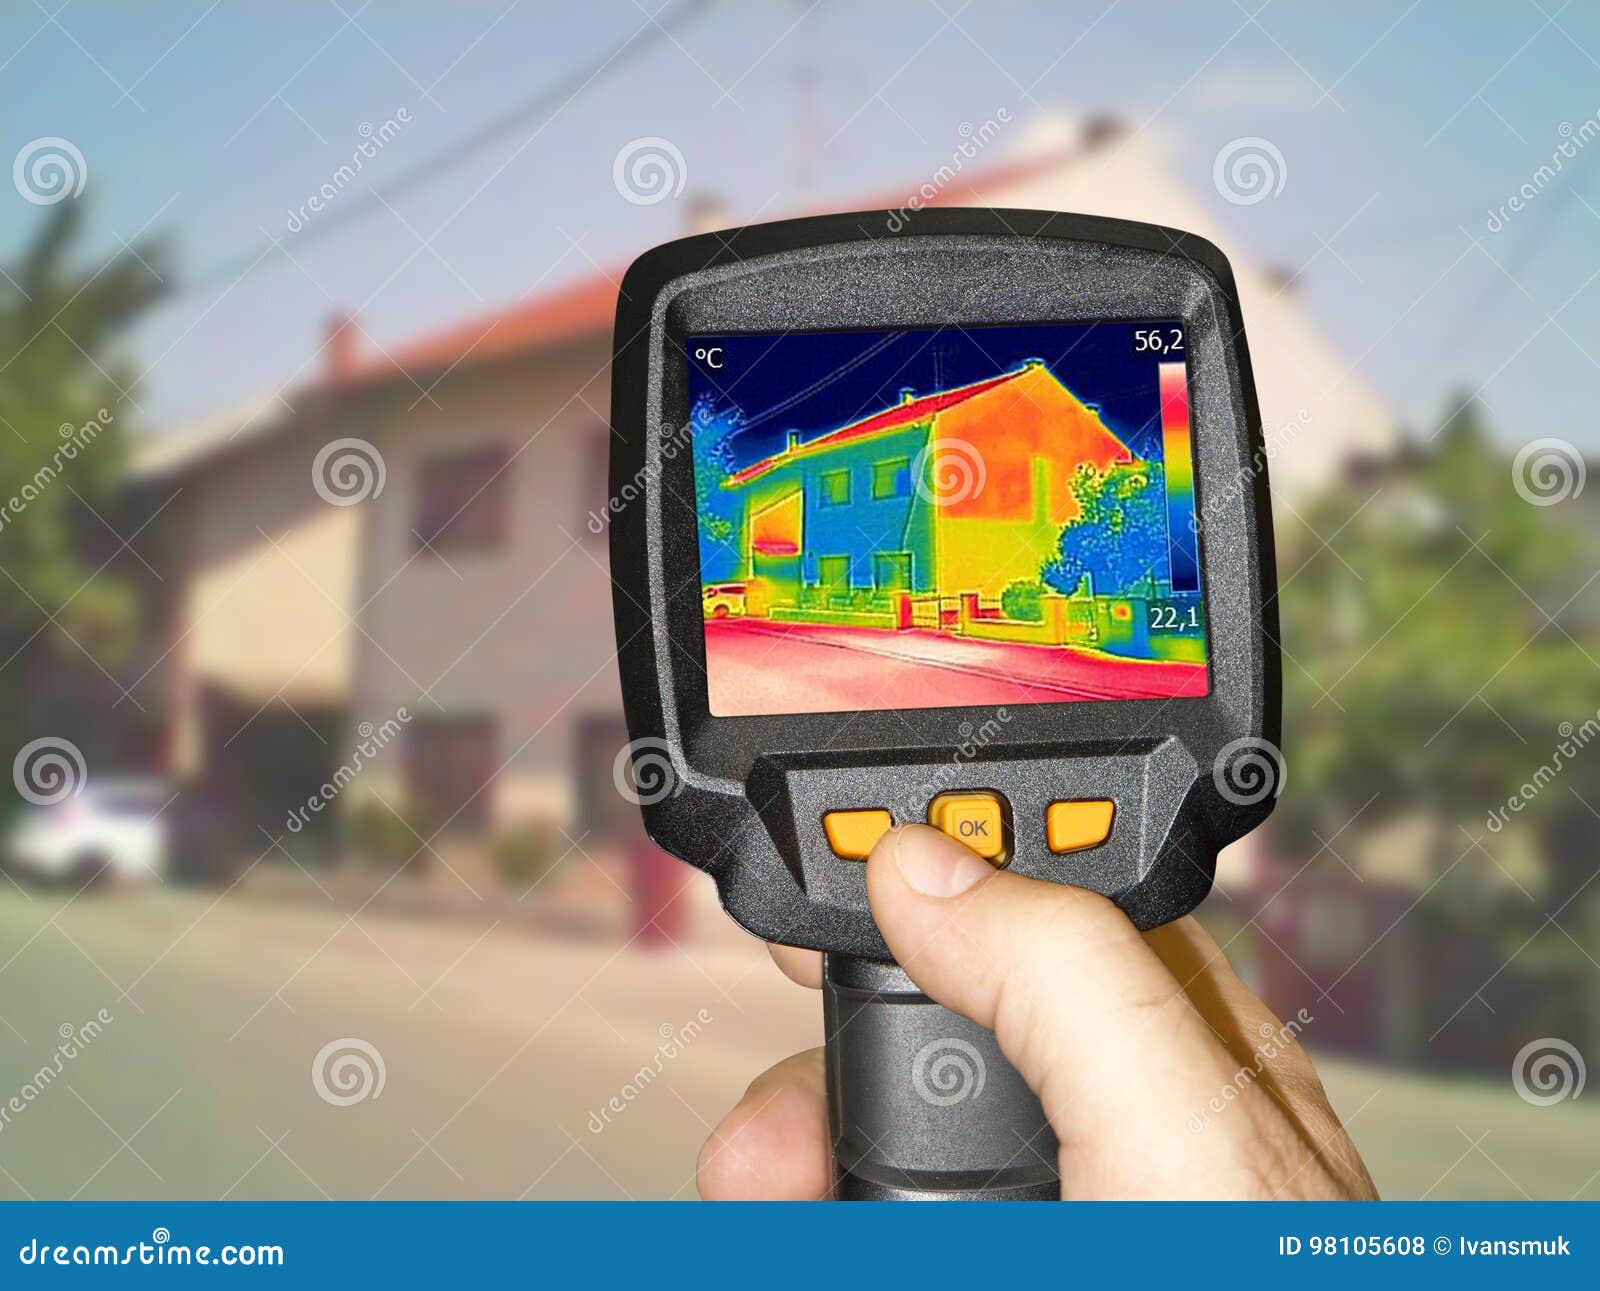 recording house with infrared thermal camera